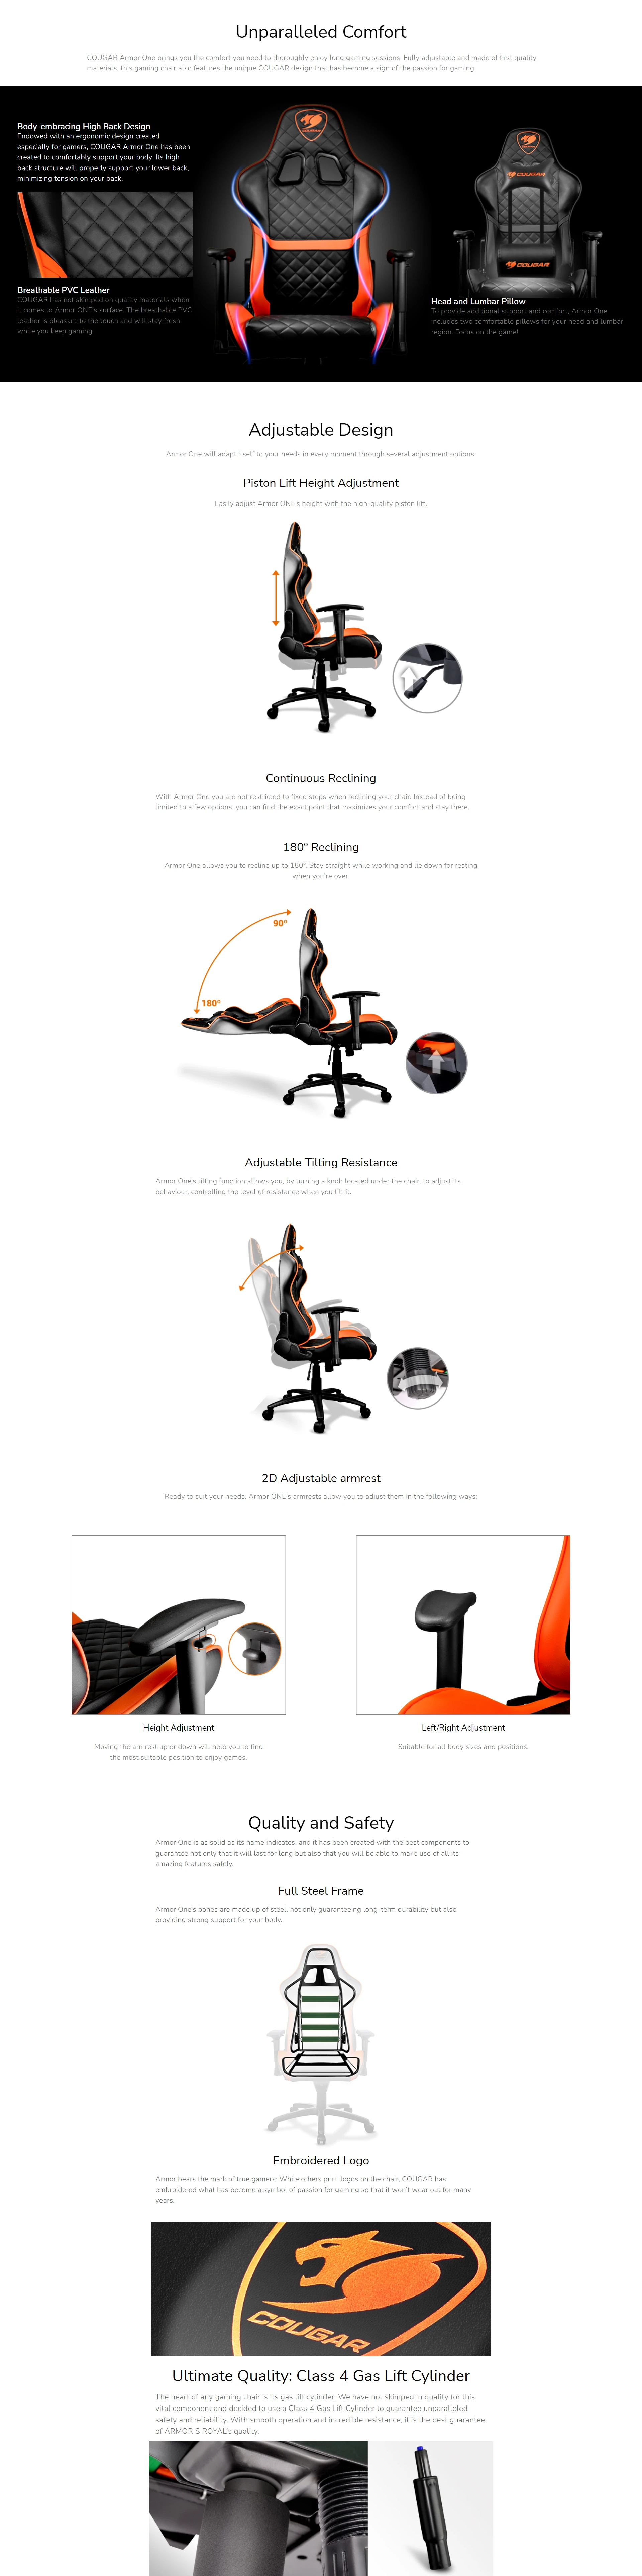 Overview - Cougar - Army One Eva - Ergonomic Gaming Chair